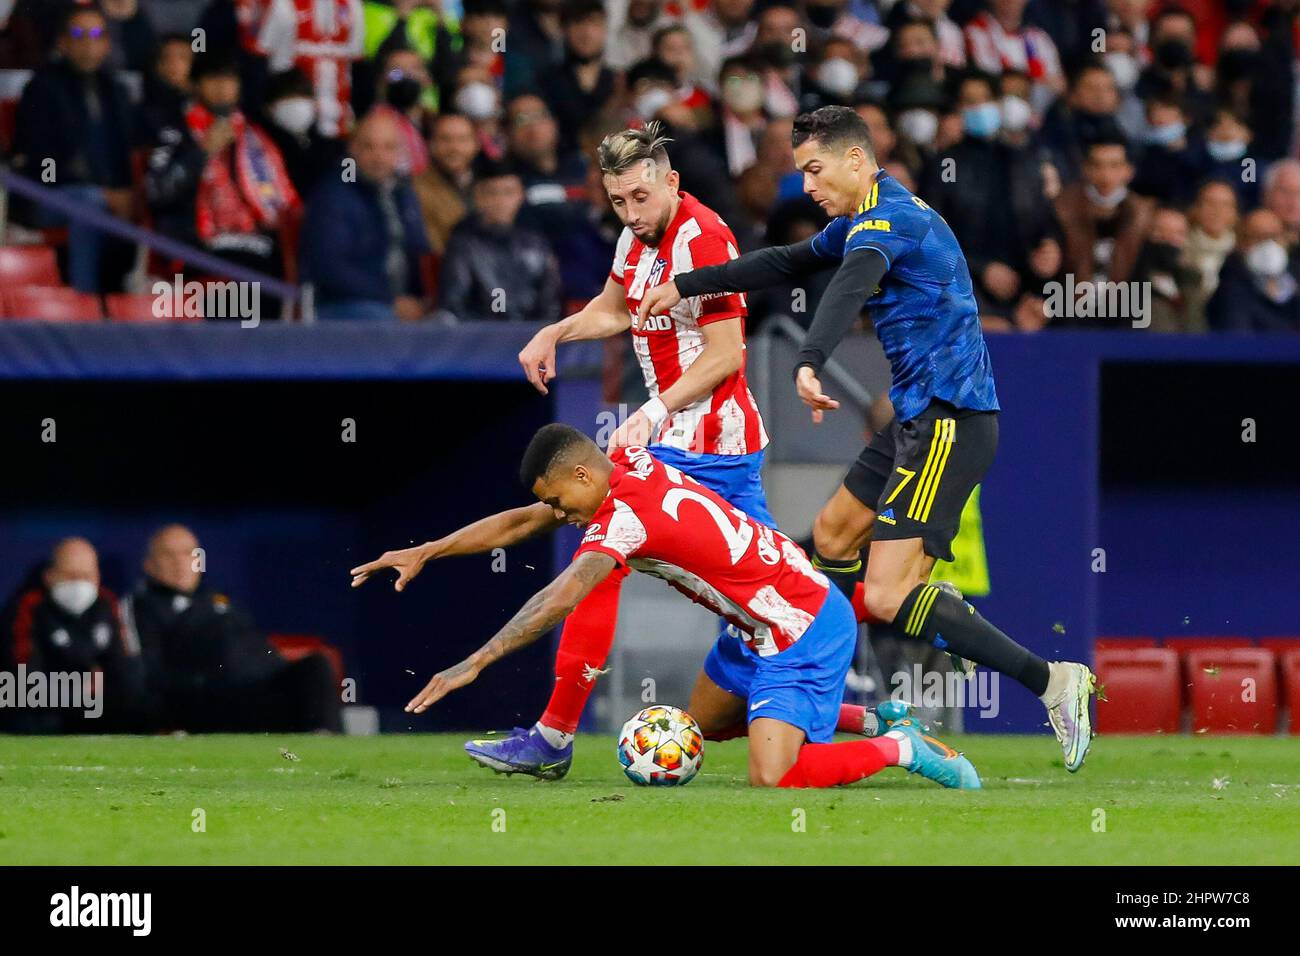 MADRID, SPAIN - FEBRUARY 23: Reinildo of Club Atletico de Madrid, Hector Herrera of Club Atletico de Madrid, Cristiano Ronaldo of Manchester United during the UEFA Champions League match between Club Atlético de Madrid and Manchester United at the Estadio Metropolitano on February 23, 2022 in Madrid, Spain (Photo by DAX Images/Orange Pictures) Stock Photo